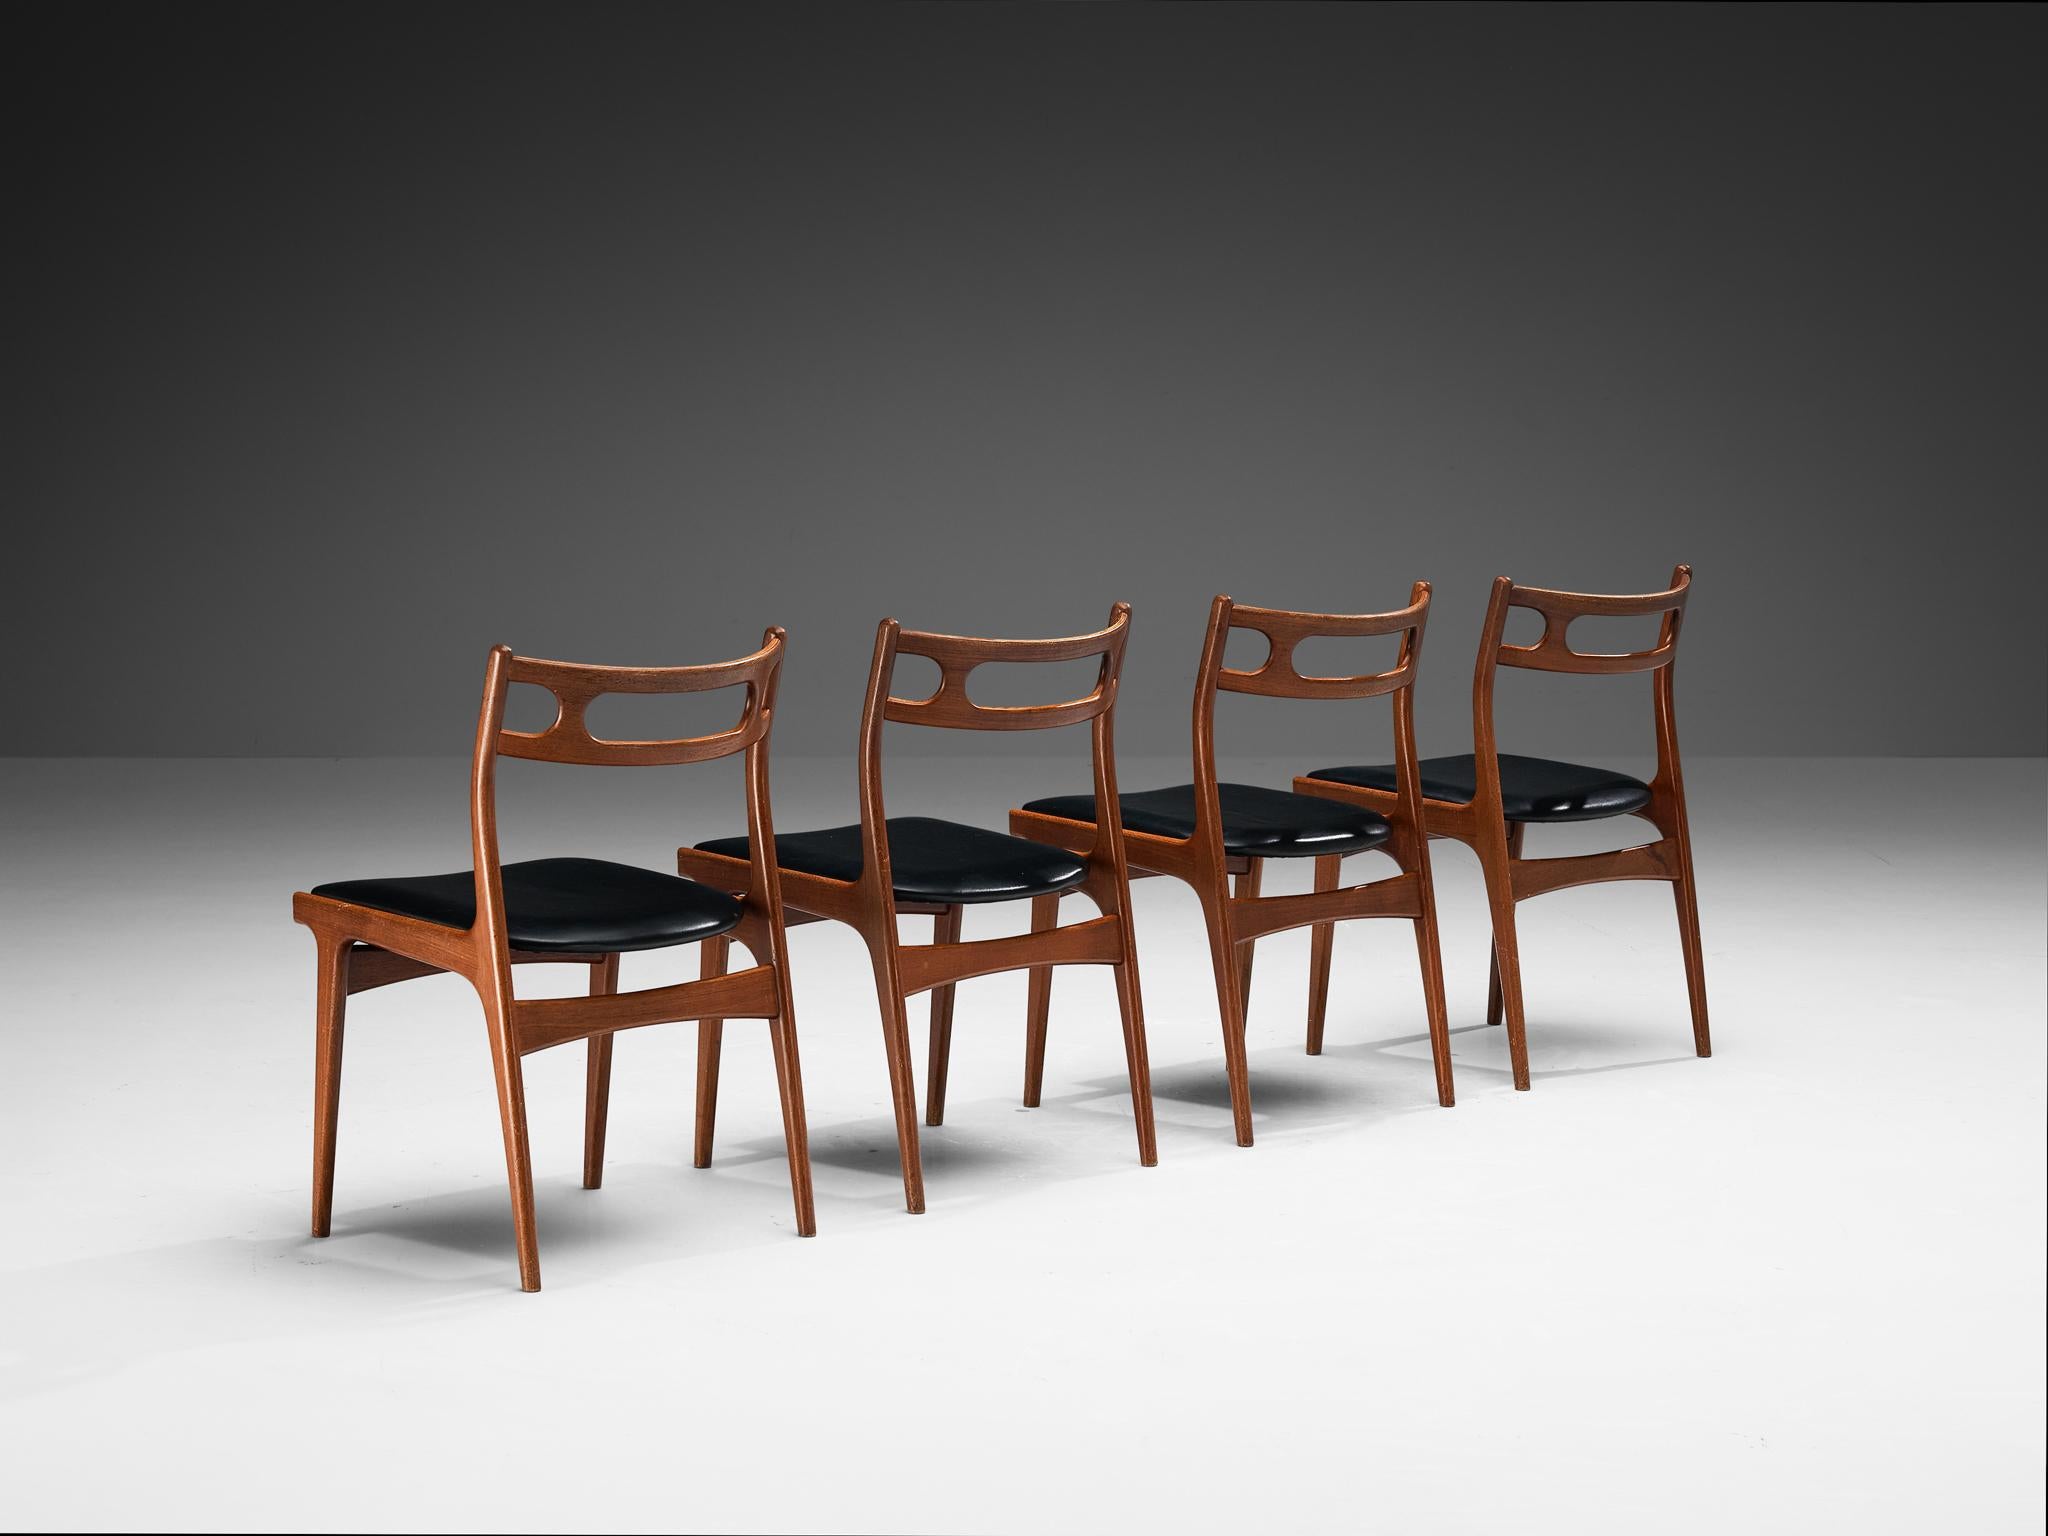 Johannes Andersen for Uldum Møbelfabrik, set of four dining chairs, model '138', teak, faux leather, Denmark, 1960s

A set of elegant dining chairs created by the Danish designer Johannes Andersen and produced by Uldum Møbelfrabrik in Denmark. The